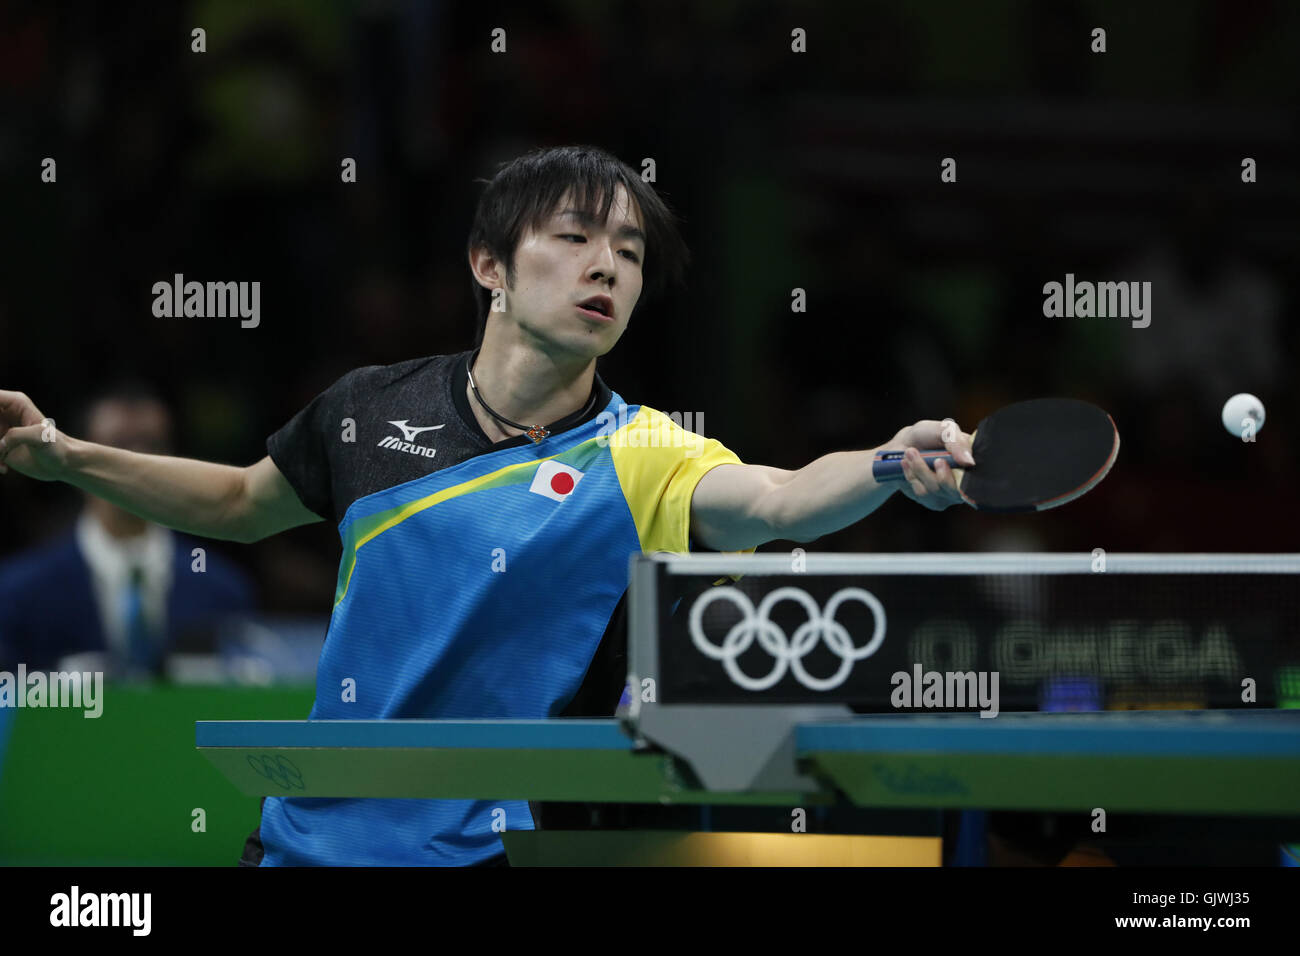 Rio De Janeiro, Brazil. 15th Aug, 2016. Japan's Koki Niwa competes during the men's team gold medal match of Tabel Tennis against China at the 2016 Rio Olympic Games in Rio de Janeiro, Brazil, on Aug. 15, 2016. © Sheng Bohan/Xinhua/Alamy Live News Stock Photo